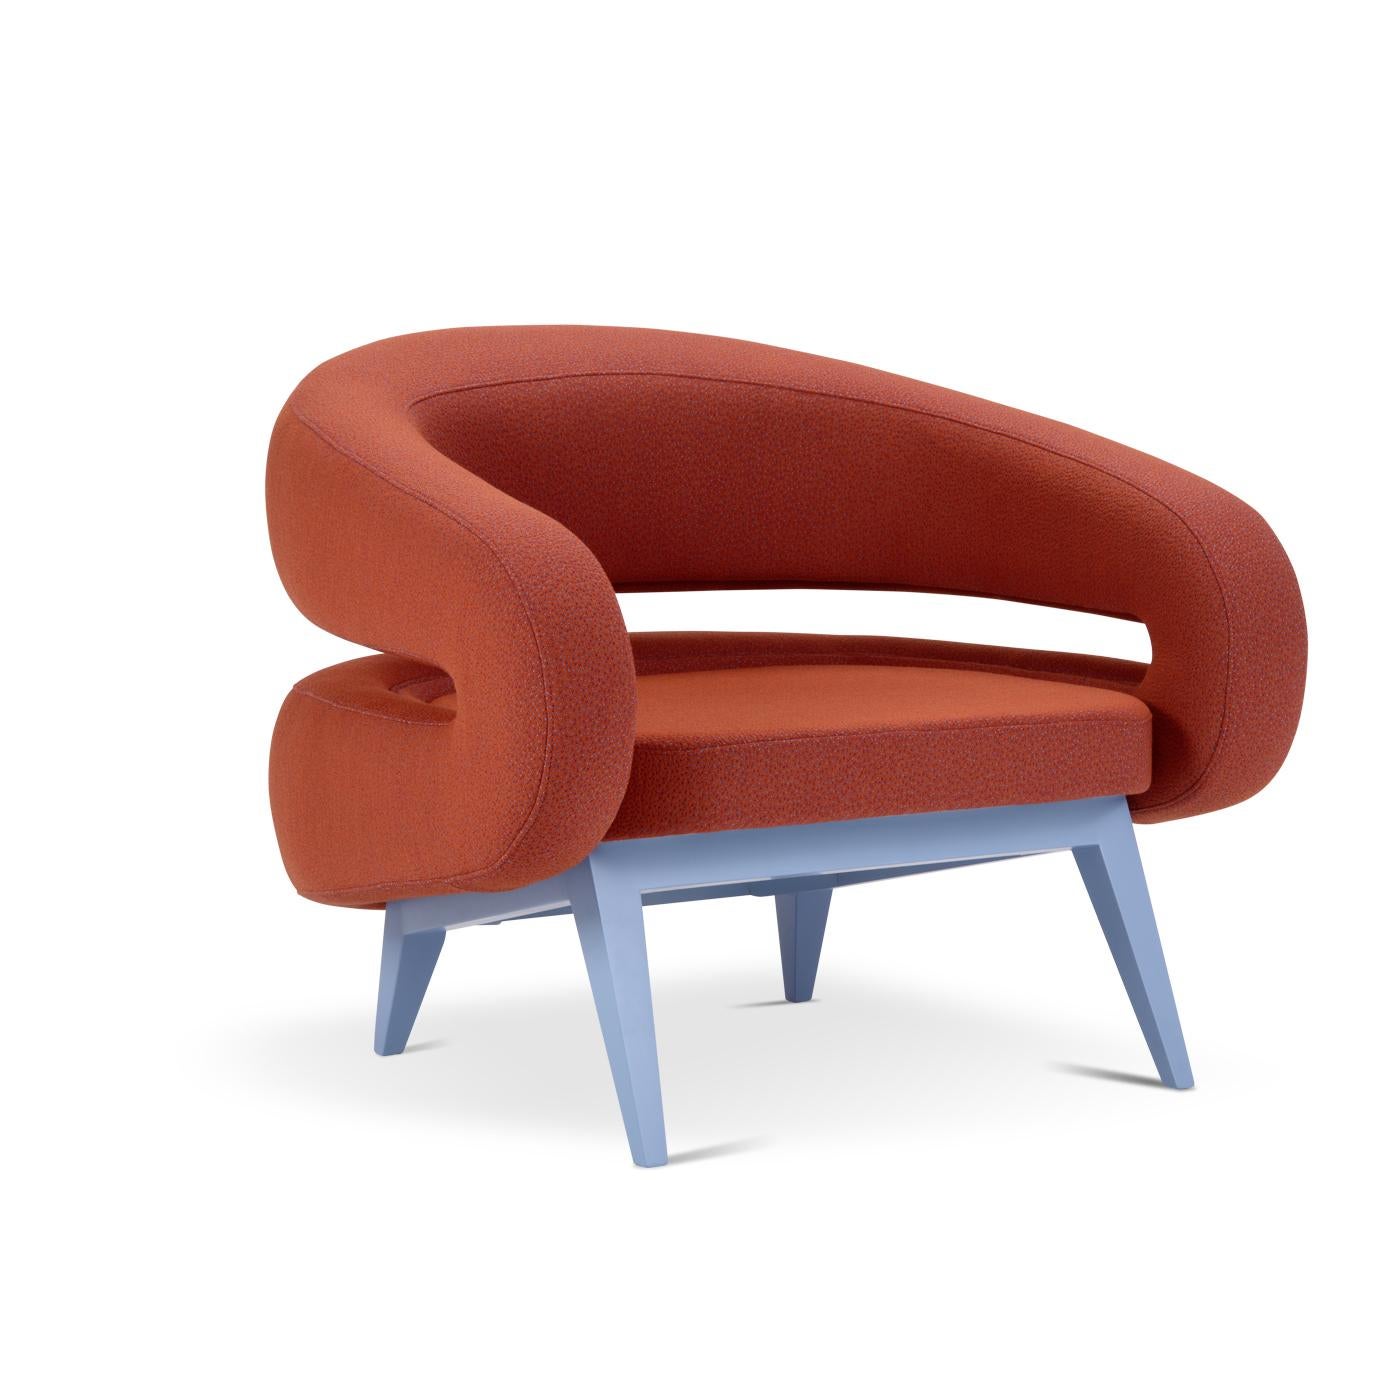 With a futuristic design, this armchair features a base made from beech wood and is available in various colors. The armchair wraps around you like a warm hug and the seat is padded with non-deformable polyurethane foam in various densities. The